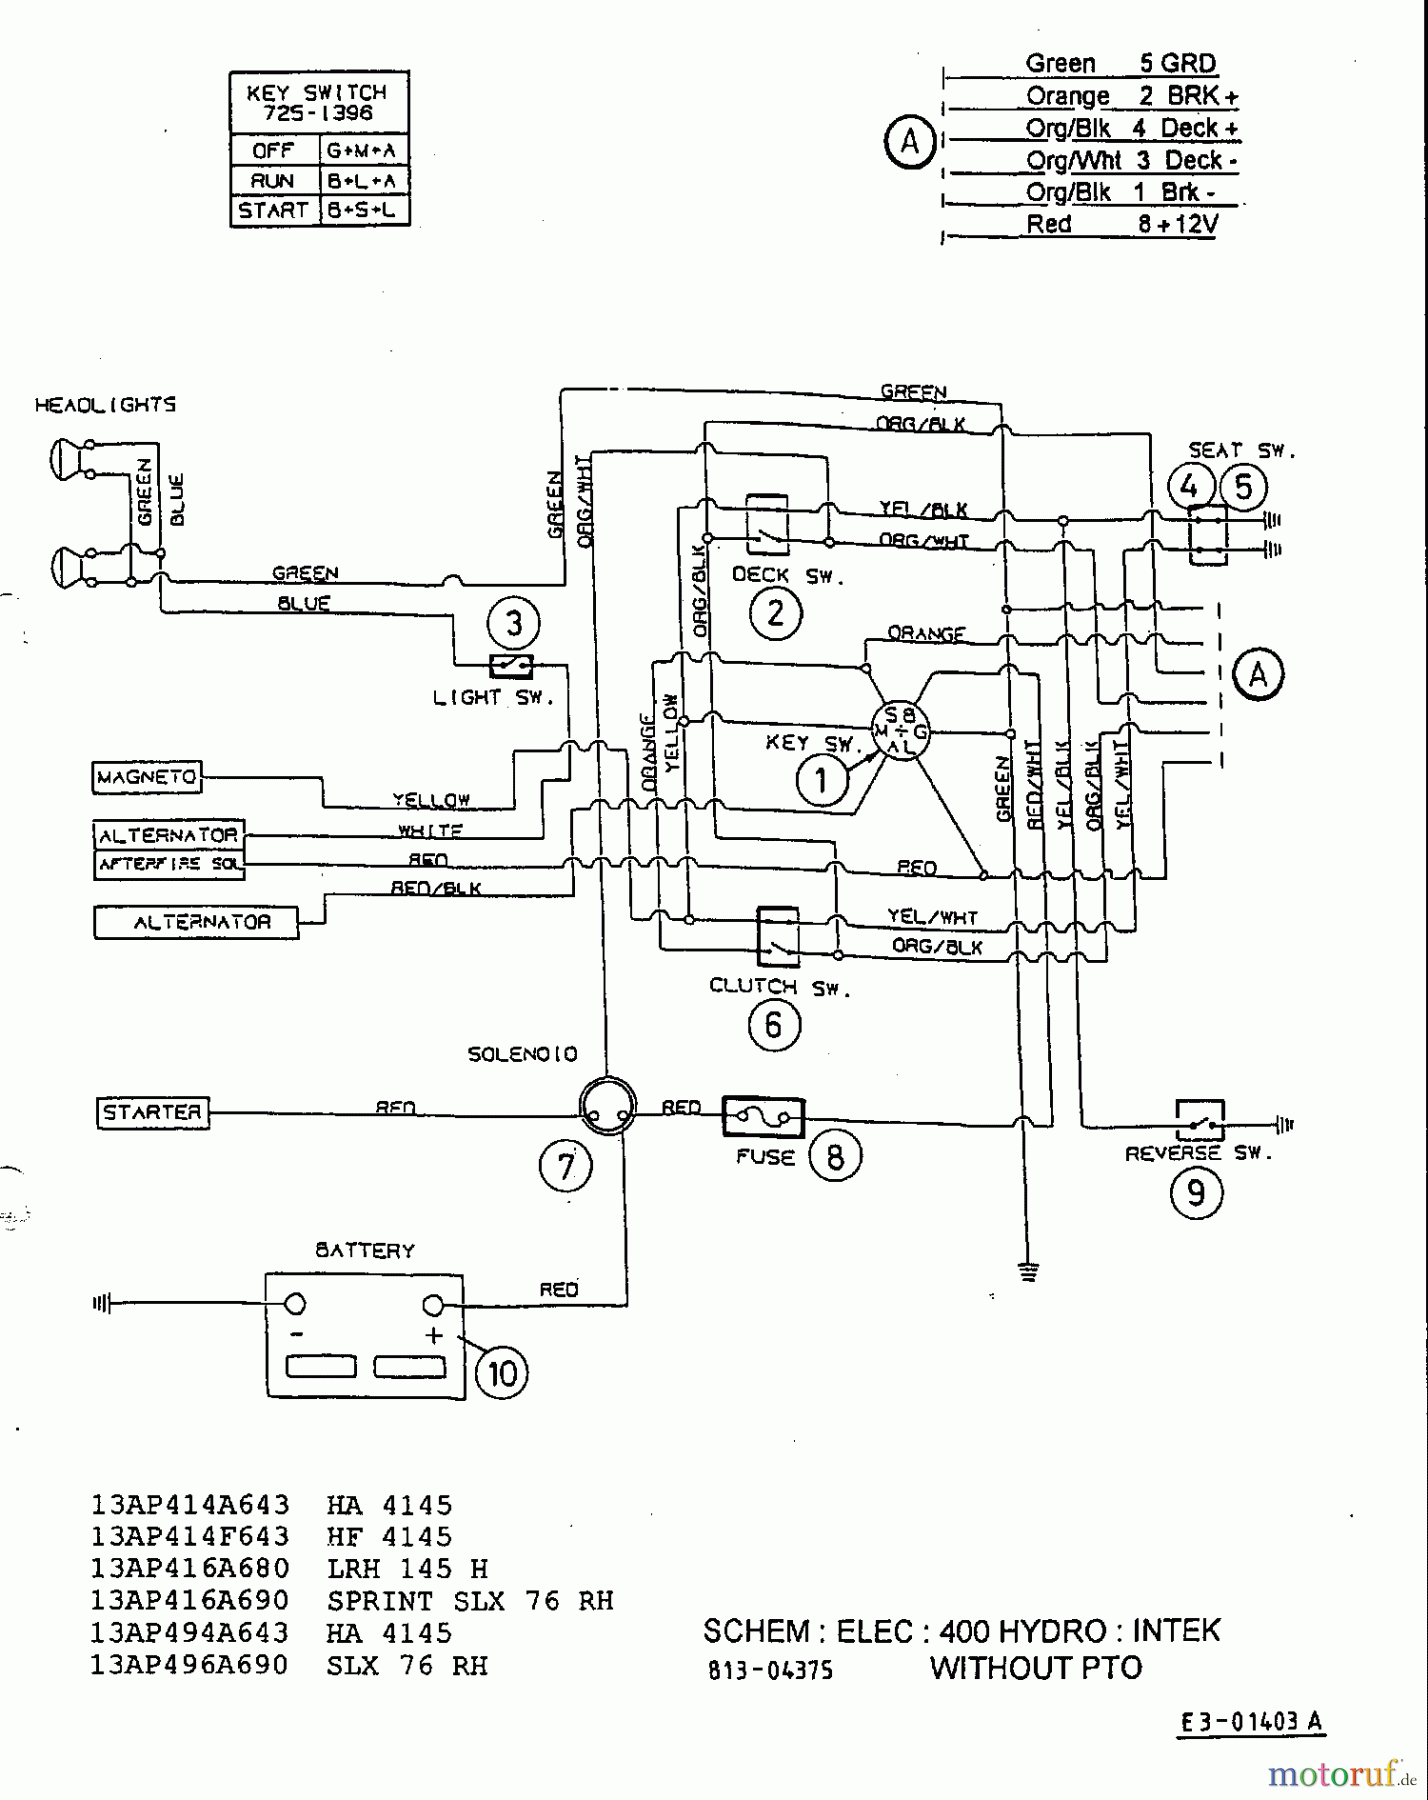  MTD Lawn tractors H 145 13AP418F678  (2003) Wiring diagram Intek without electric clutch